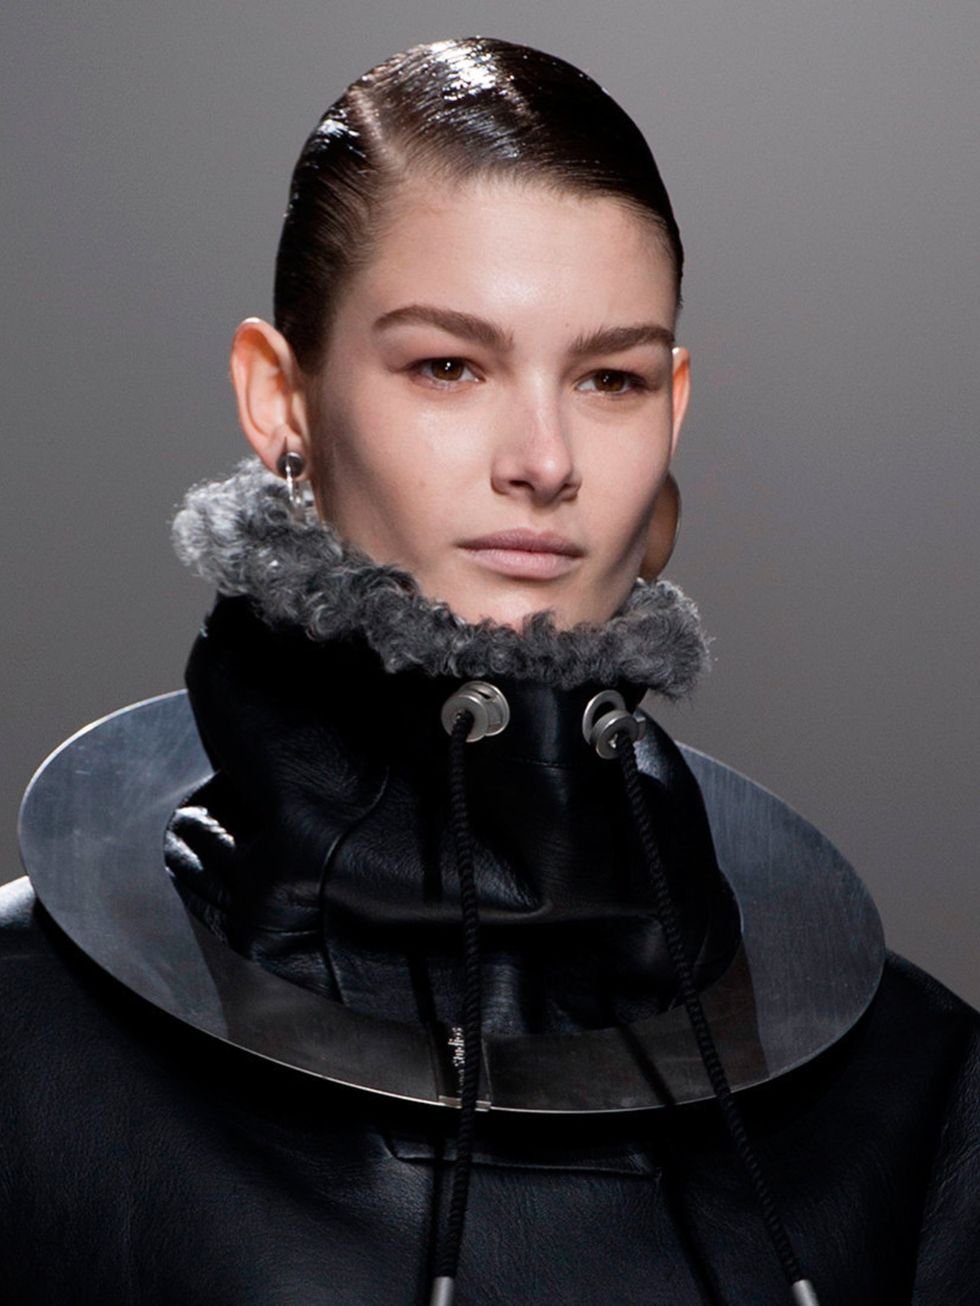 <p>Hair Stylist: Anthony Turner for L'Oreal Professionnel</p><p>Look: HIgh-shine ponytails to offset the earthy textures and knits in the collection.</p><p>Inspiration: Androgyny</p><p>Key Product: L'Oreal Professionnel Tecni.Art Glue</p><p>Tip: Use the g